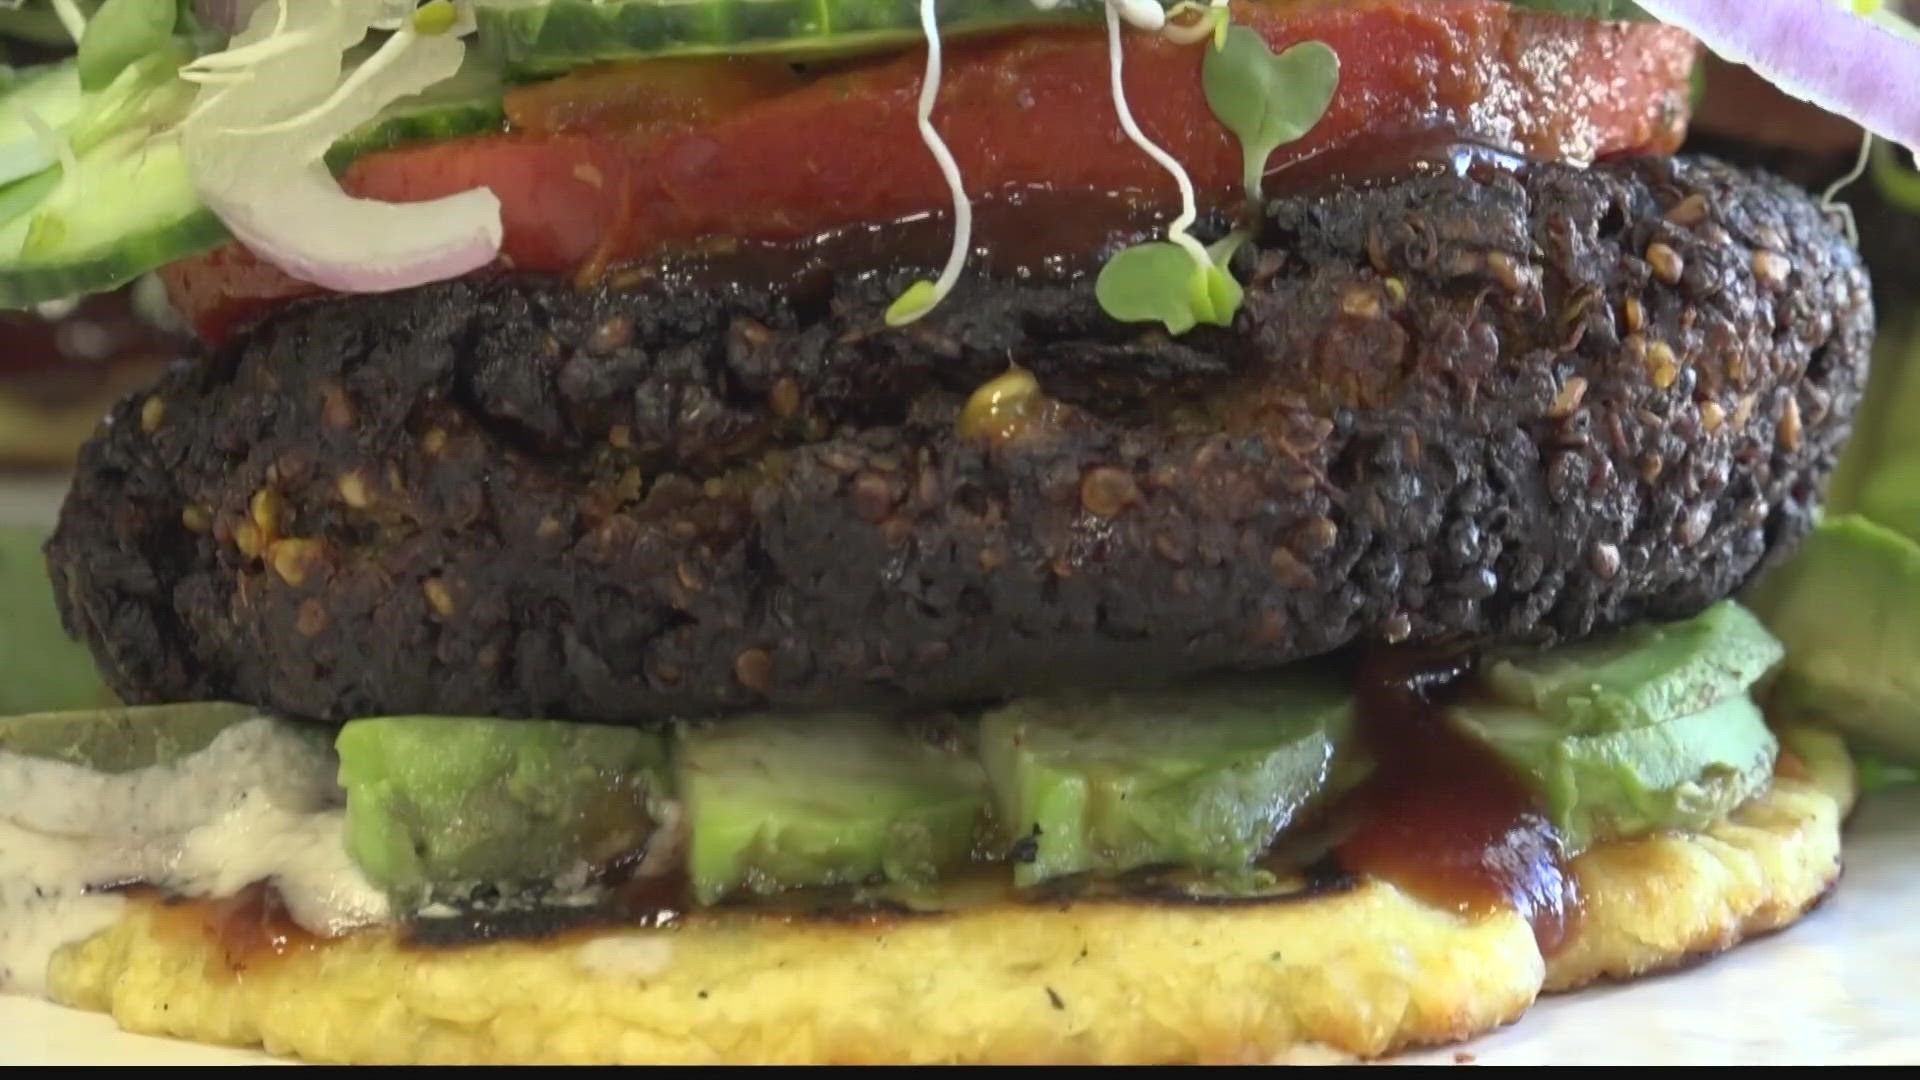 Chef Will with Lowe Mill shares a vegan-friendly burger recipe with FOX54's Keneisha Deas.